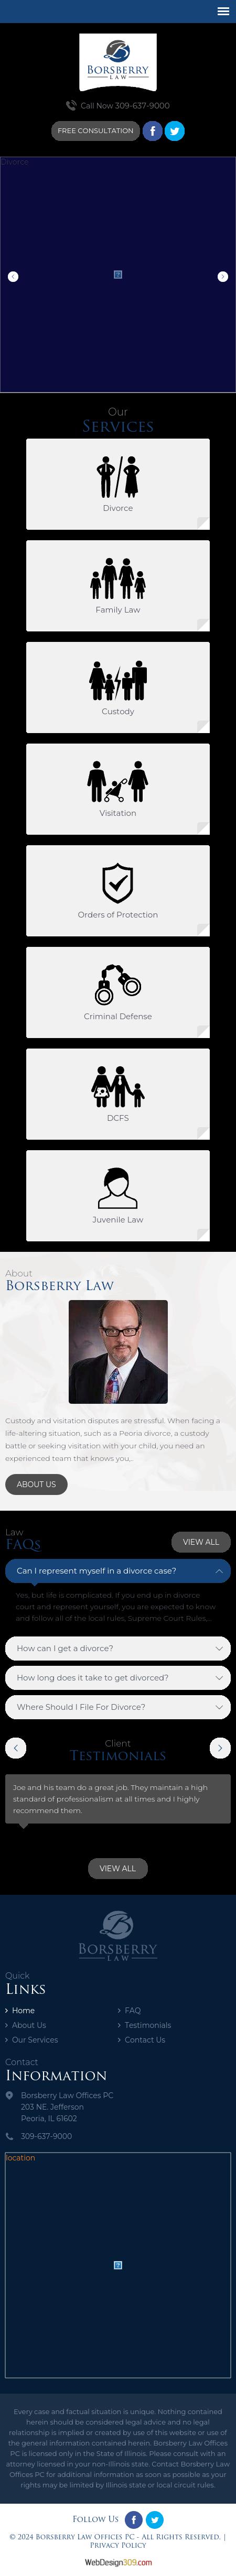 Borsberry Law Offices PC - Peoria IL Lawyers